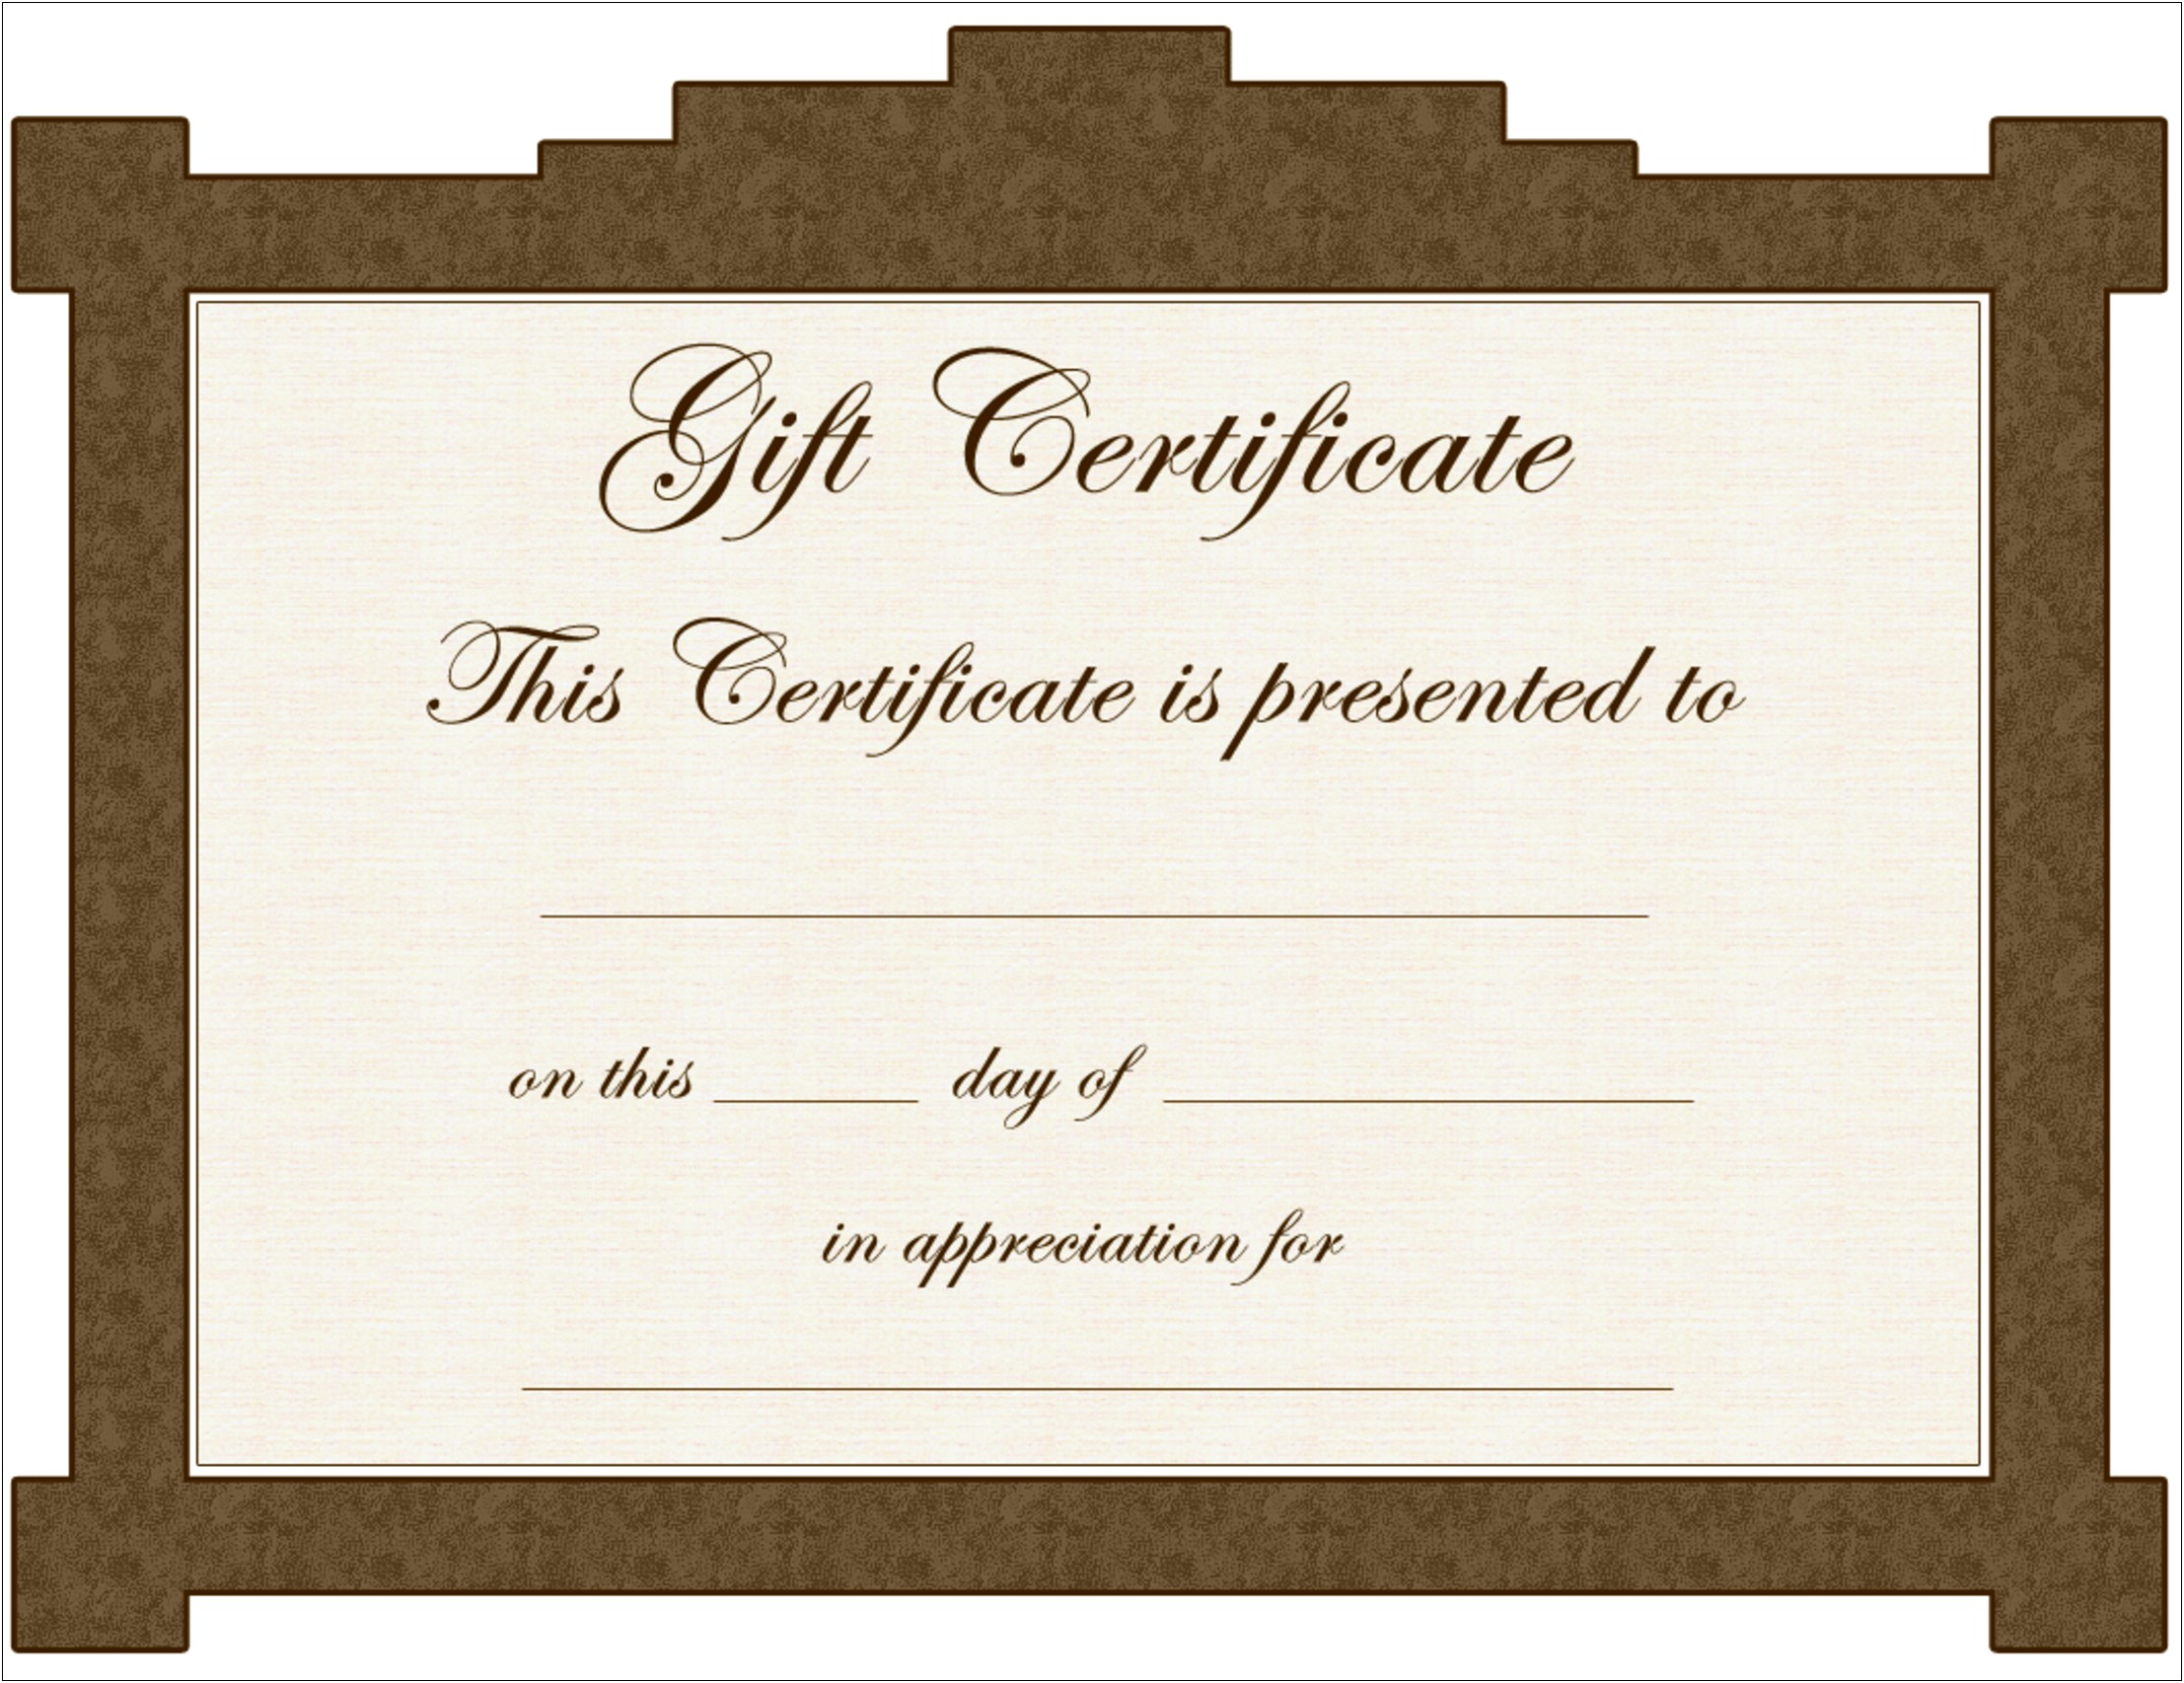 Gift Certificate Template In Word 2007